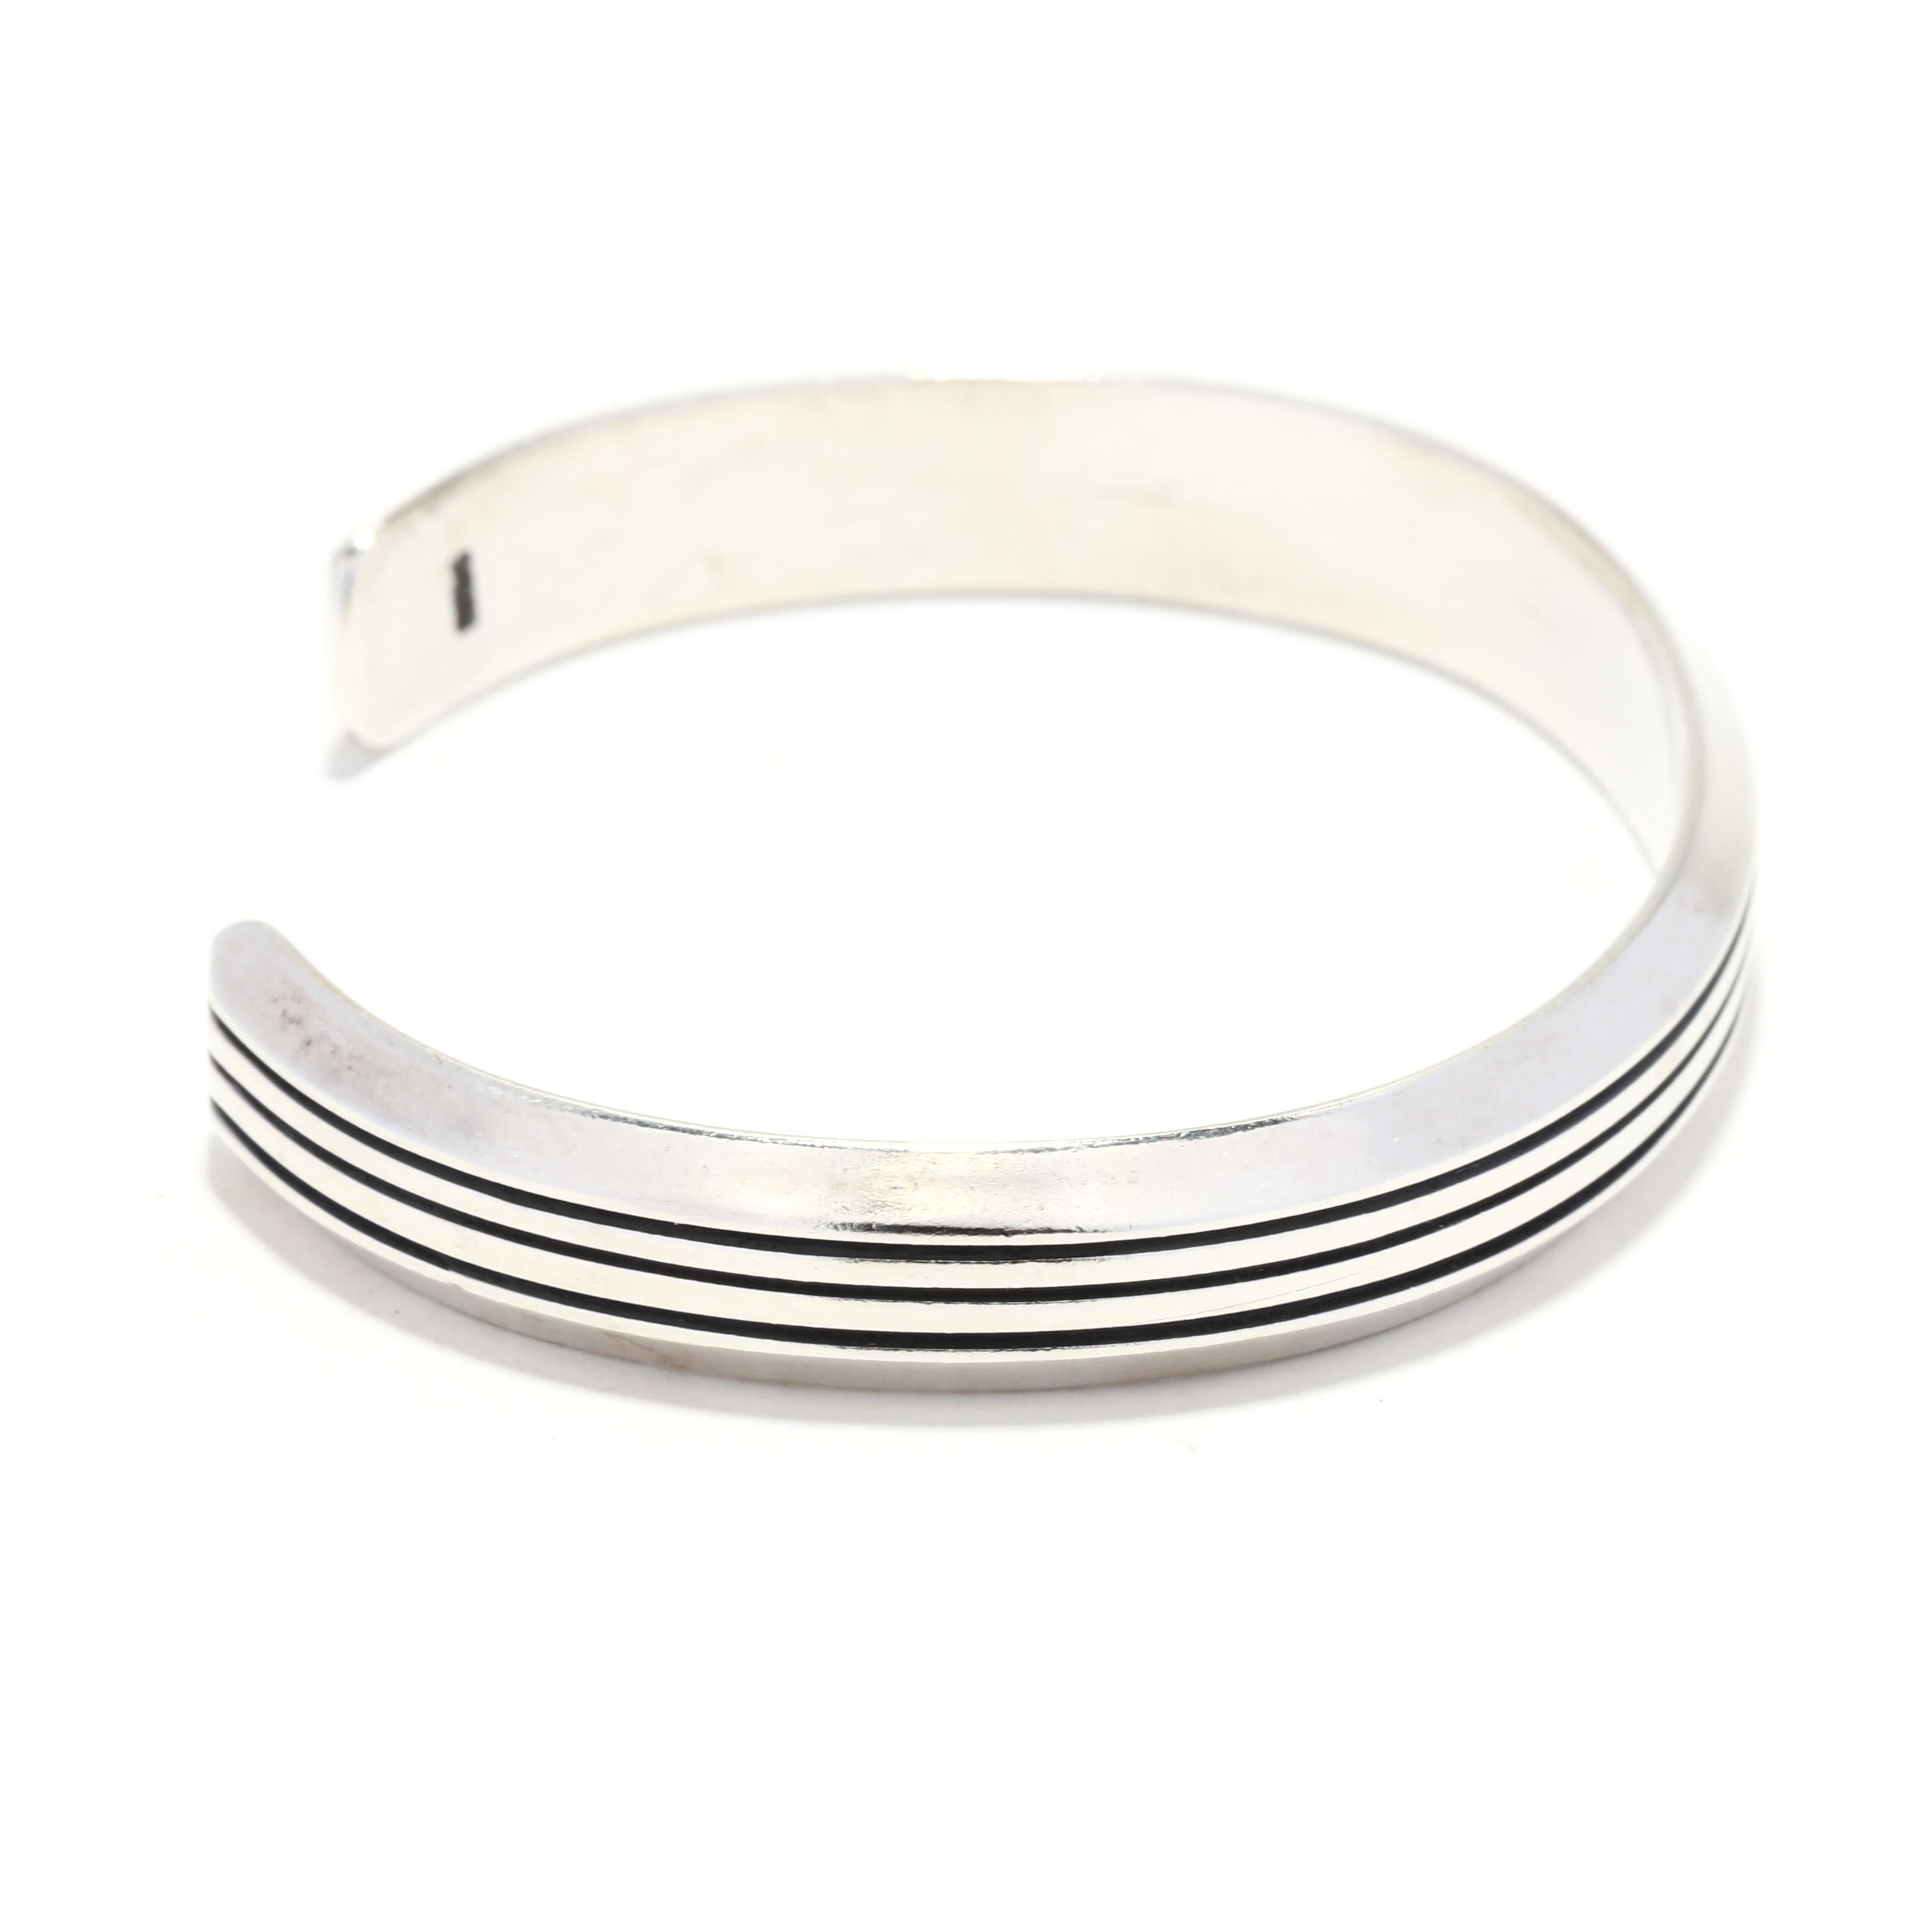 A sterling silver ridged cuff bracelet. This simple silver cuff bracelet features a band of incised engraved lines and a beveled edge. It is stamped 925. 

Length: 6.5 inch interior circumference with 1 inch opening

Width: 5/16 inch

Weight: 16.7